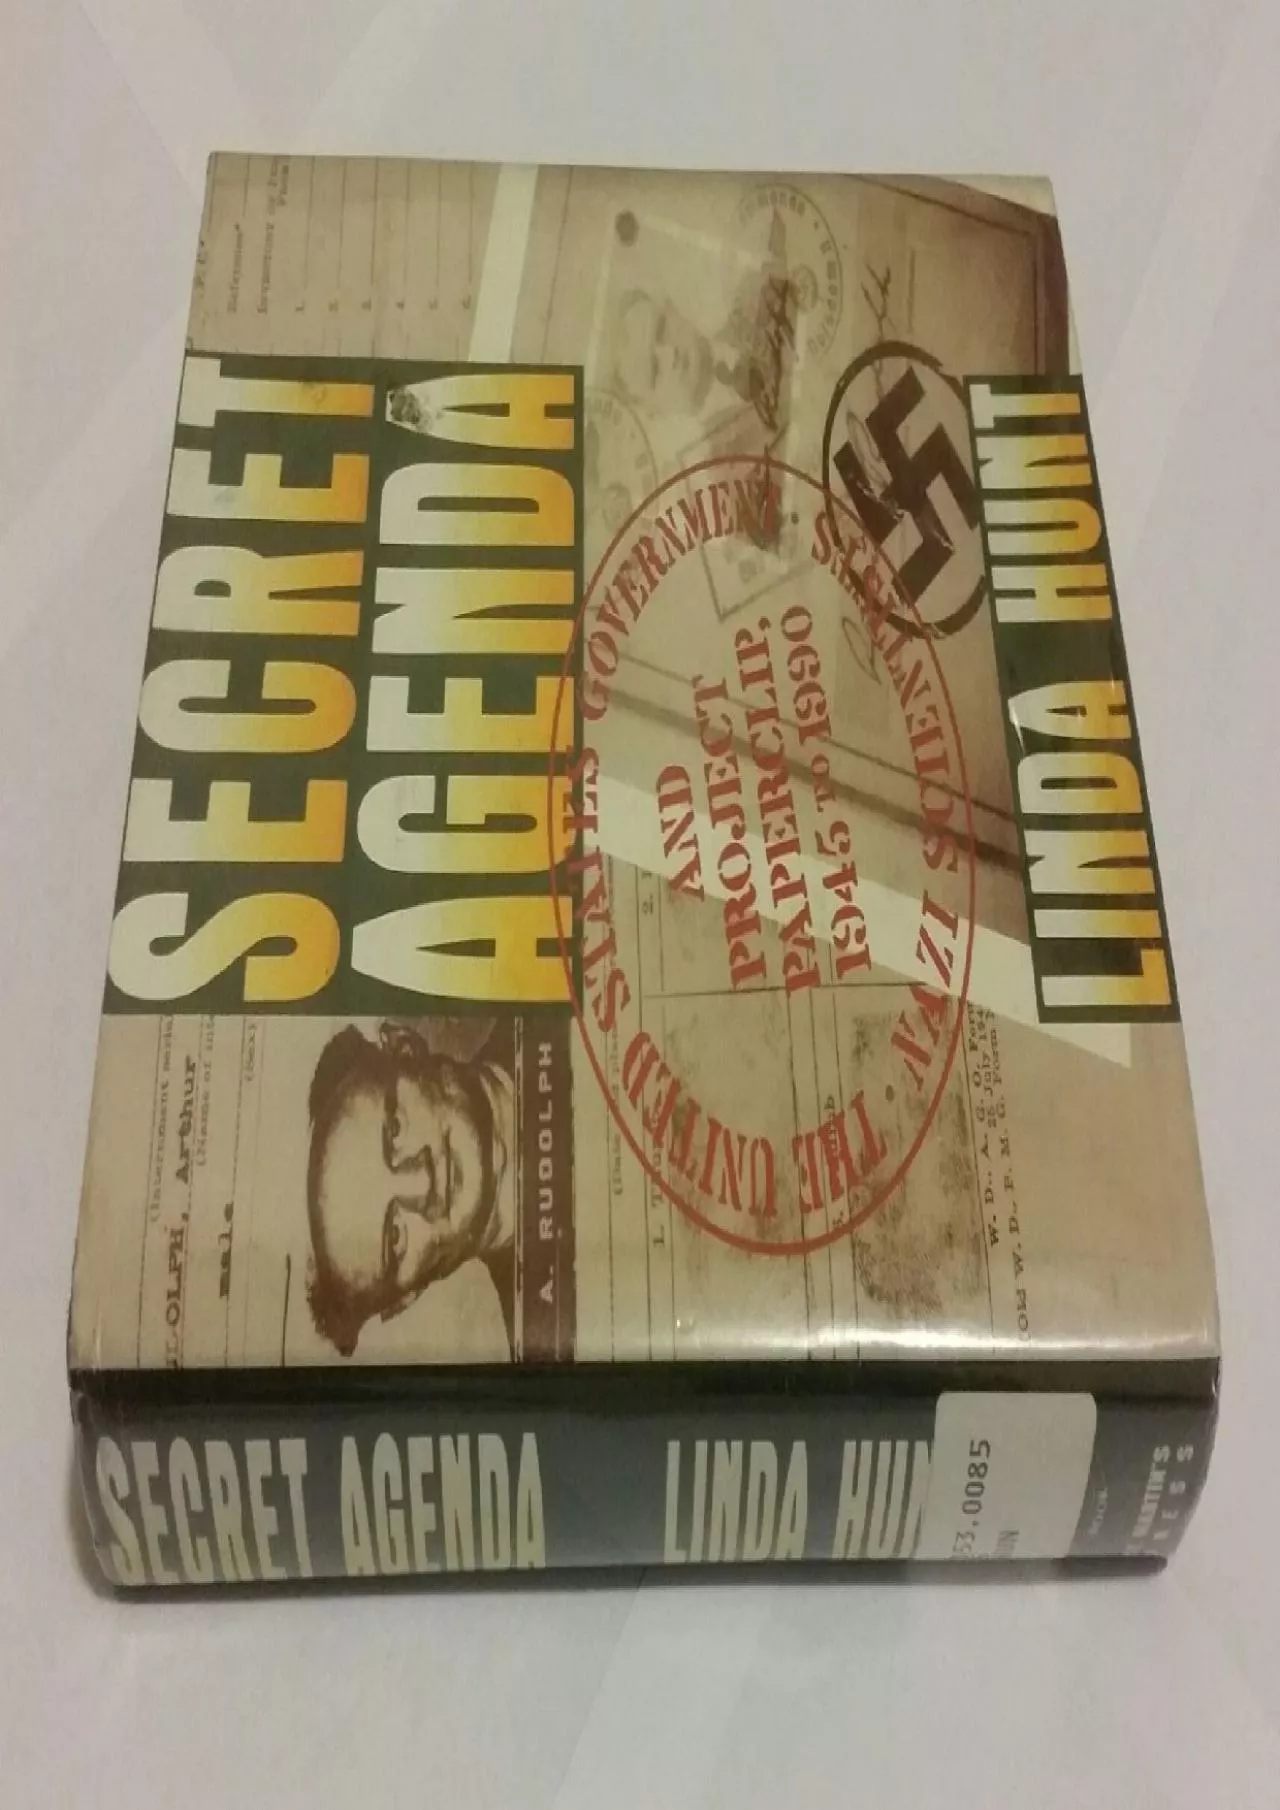 [EBOOK]-Secret Agenda: The United States Government, Nazi Scientists, and Project Paperclip,